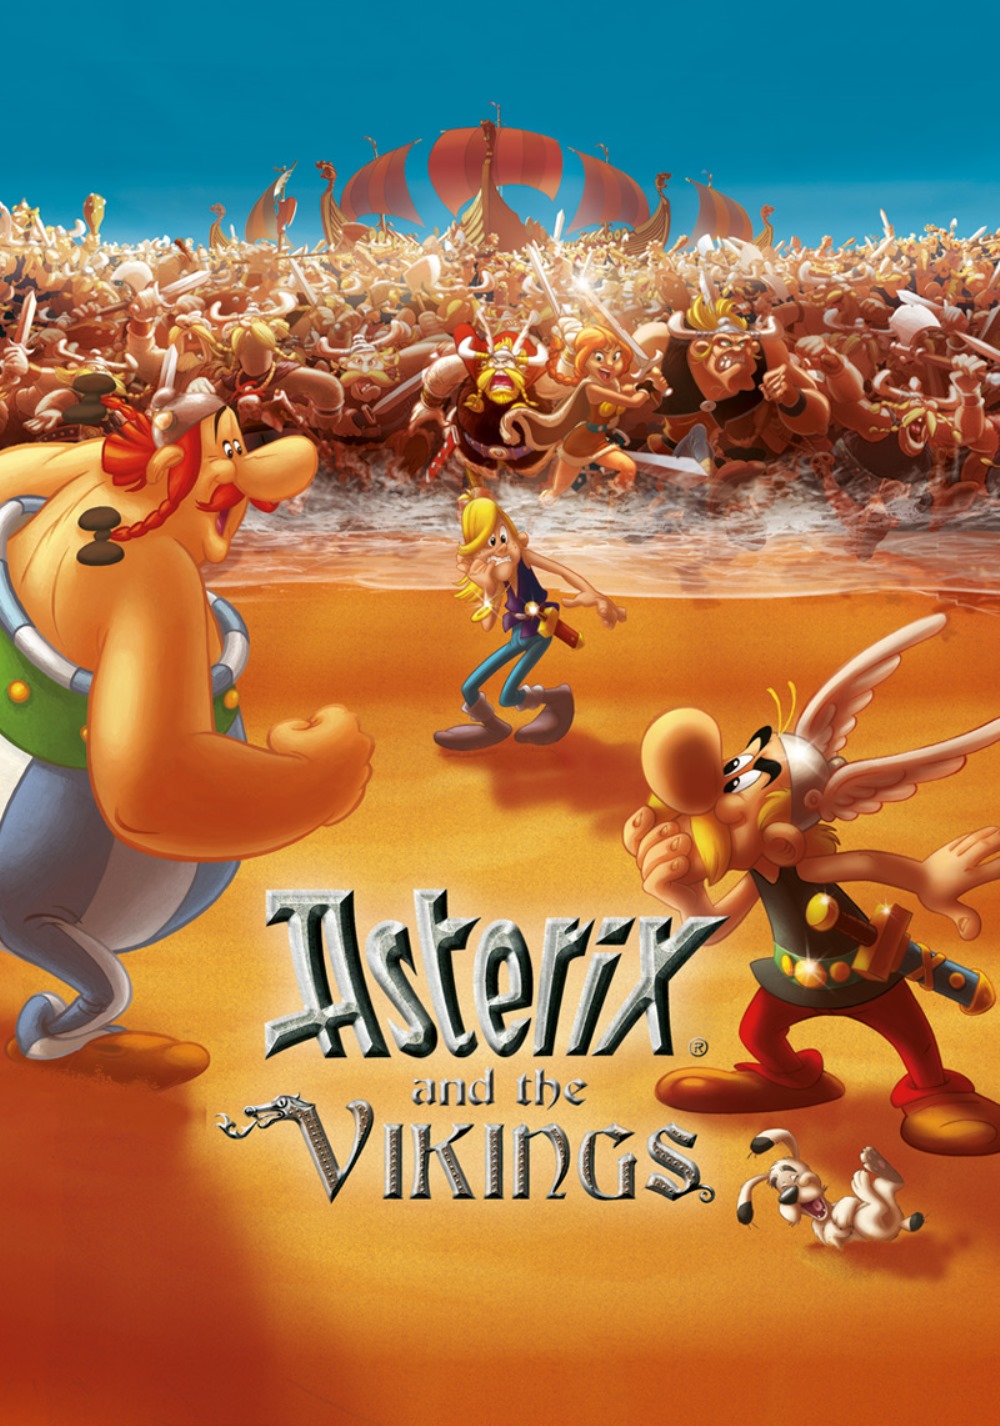 asterix-and-the-vikings-52bed9250d95a.jpg